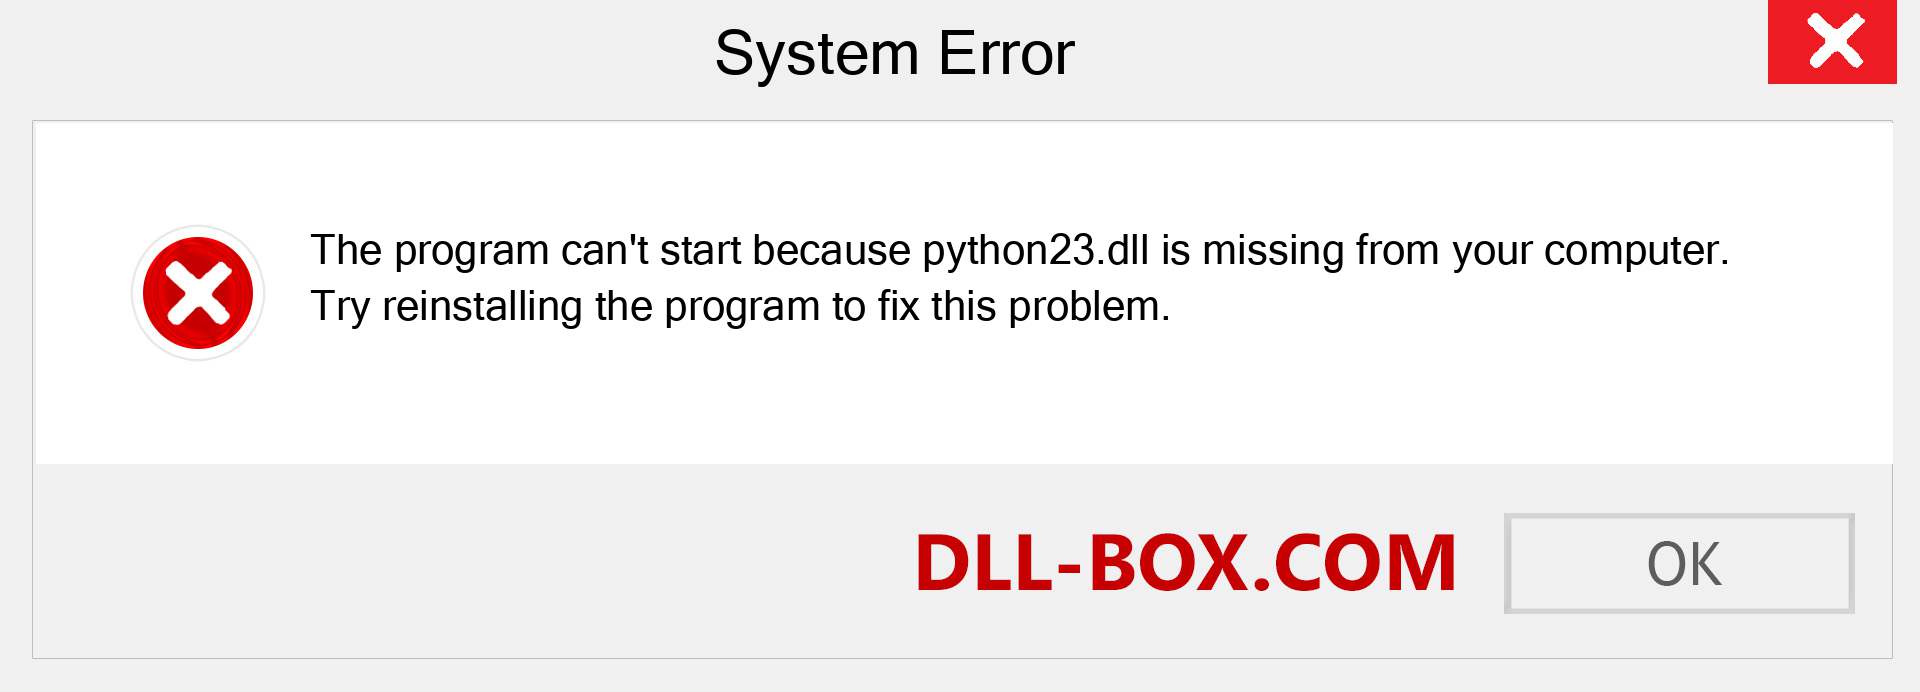  python23.dll file is missing?. Download for Windows 7, 8, 10 - Fix  python23 dll Missing Error on Windows, photos, images